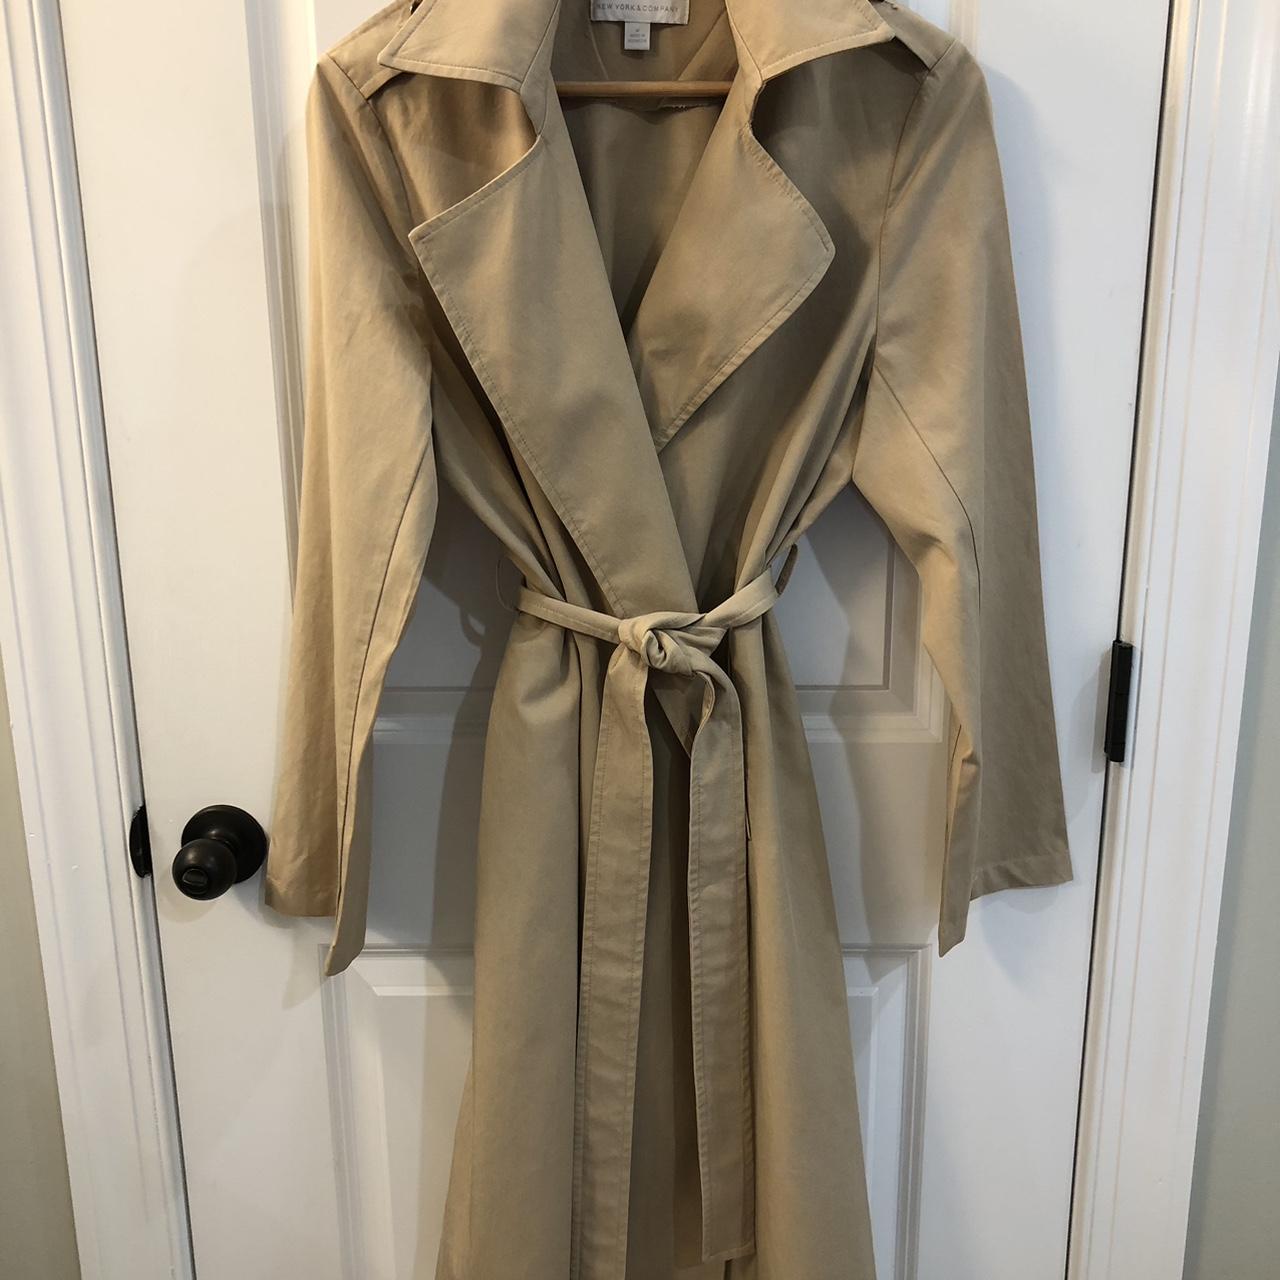 Trench coat by New York and Company. Open front with... - Depop